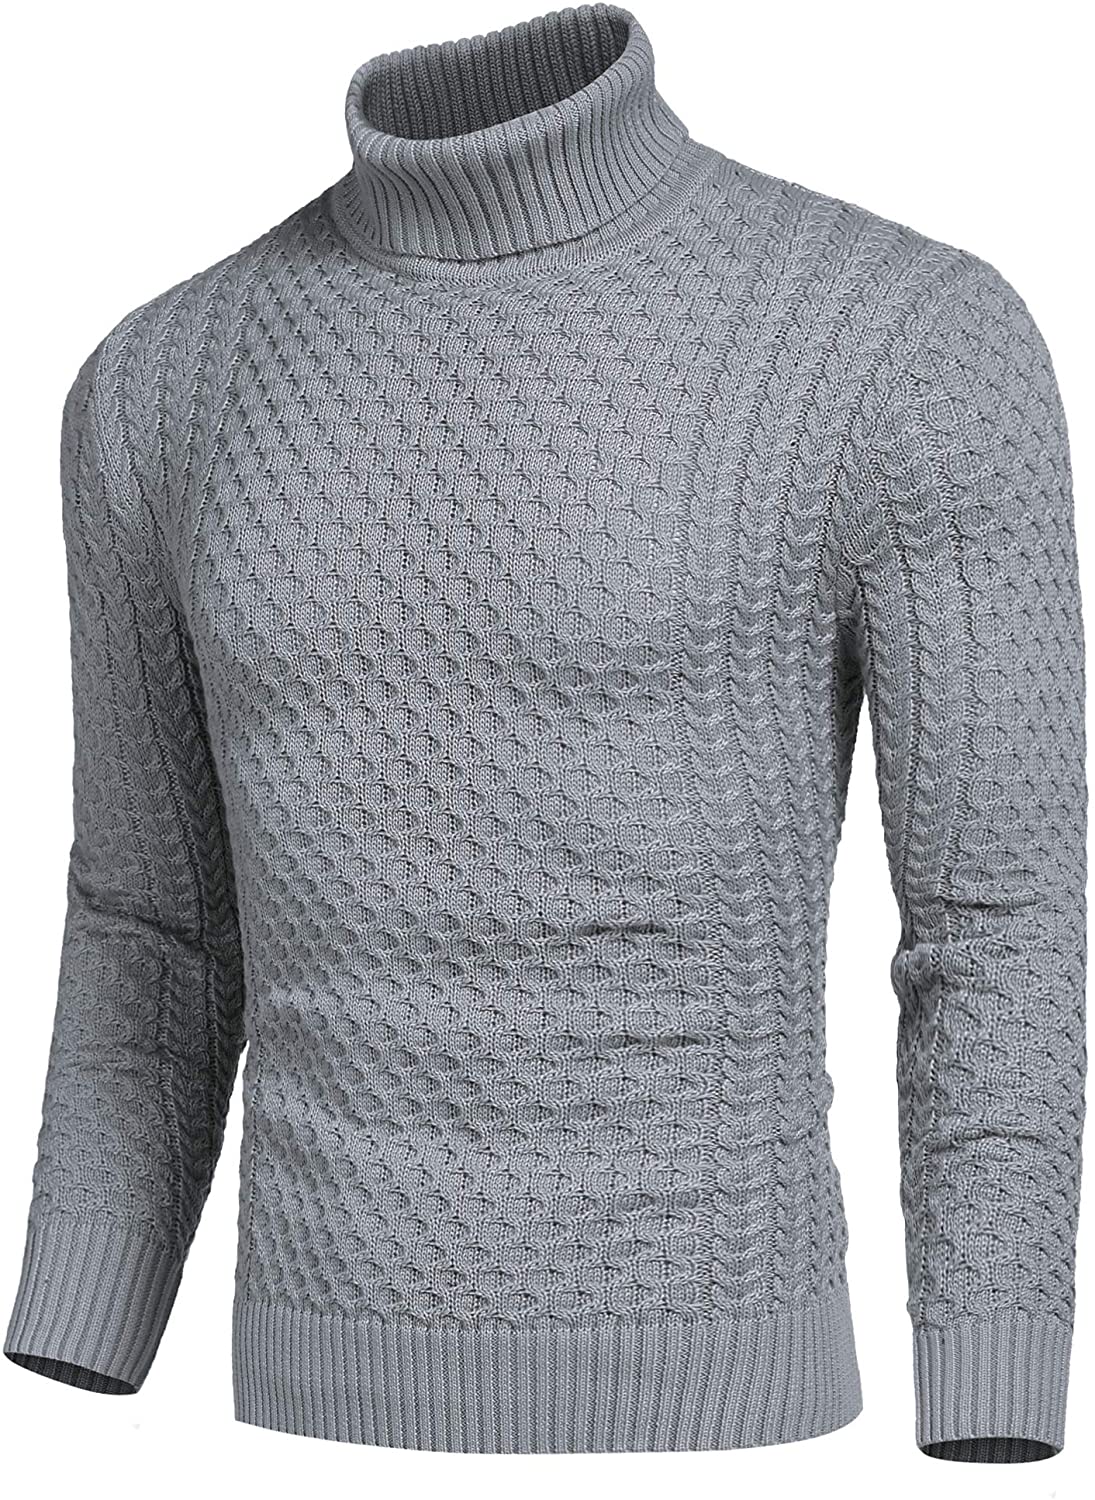 Coofandy Mens Slim Fit Turtleneck Sweater Casual Knitted Twisted Pullover Solid Ebay